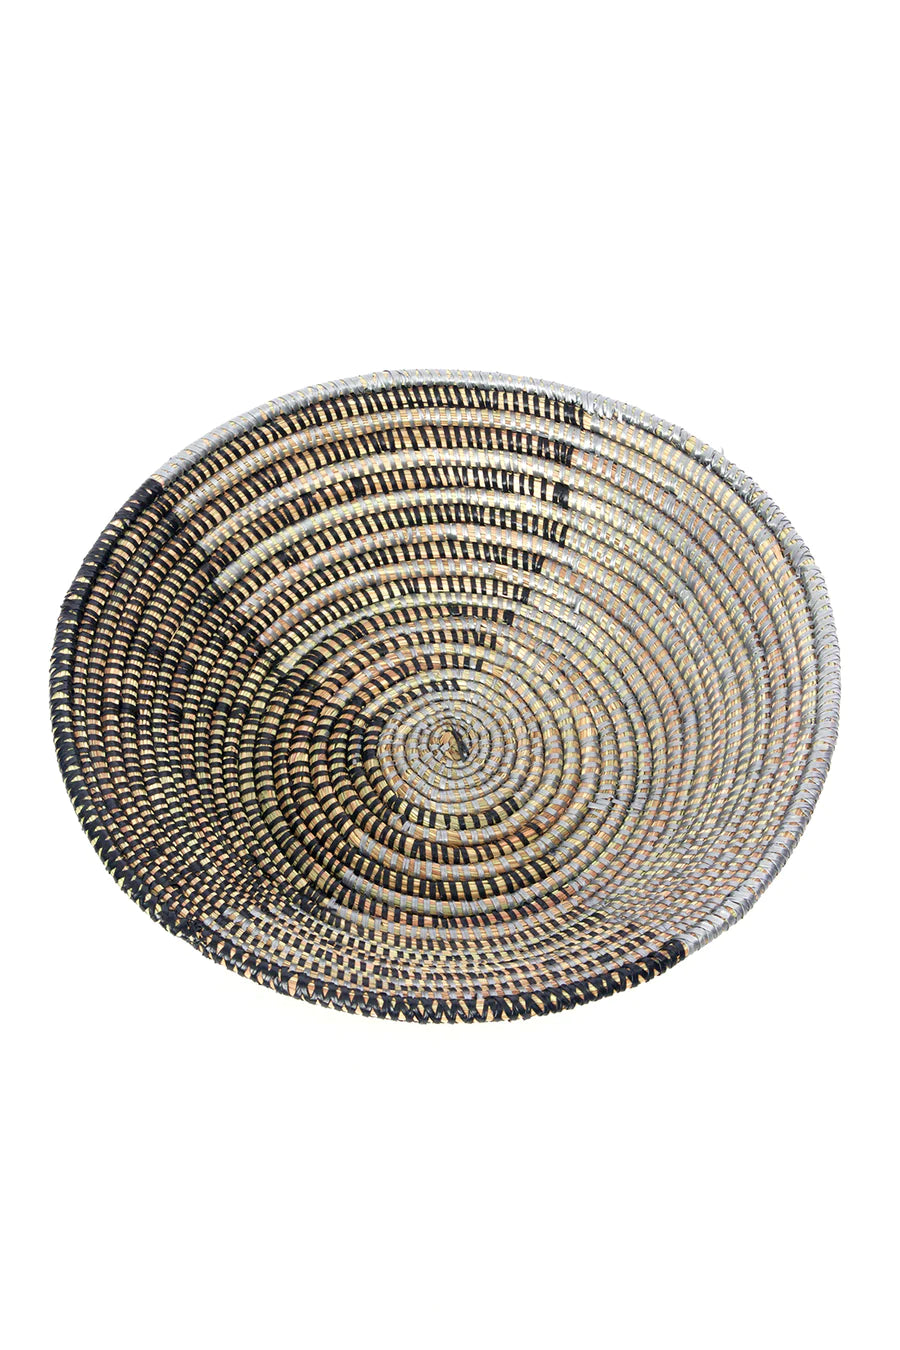 Table Top Silver and Black Basket-14''D